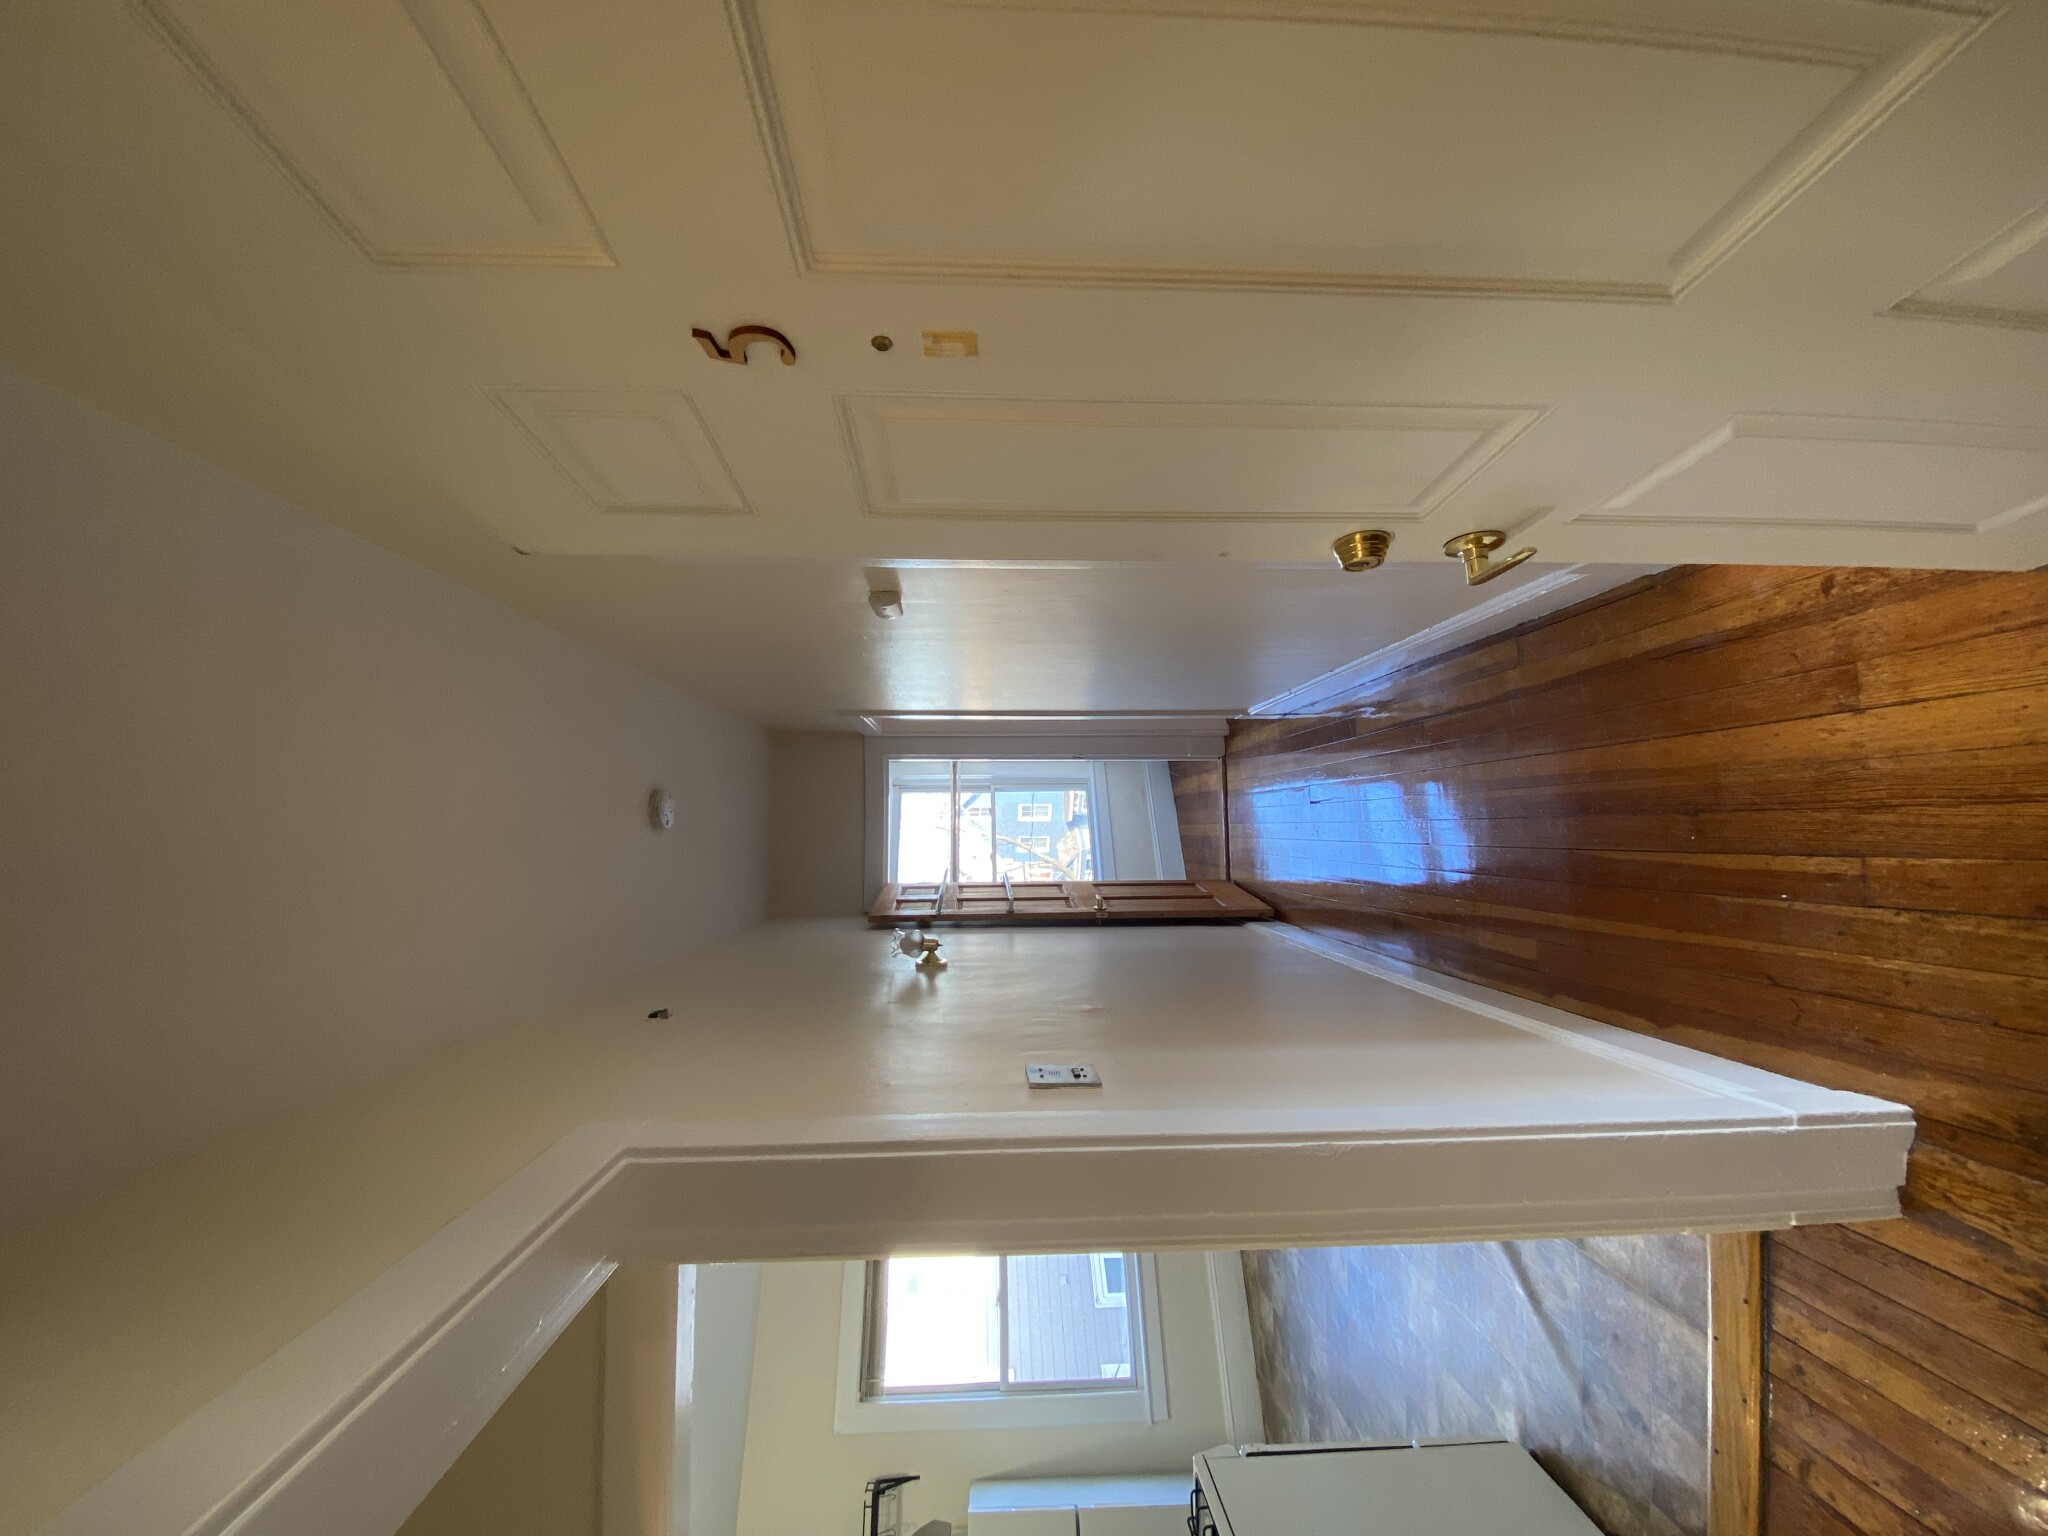 Photos of apartment on Forest,Cambridge MA 02140